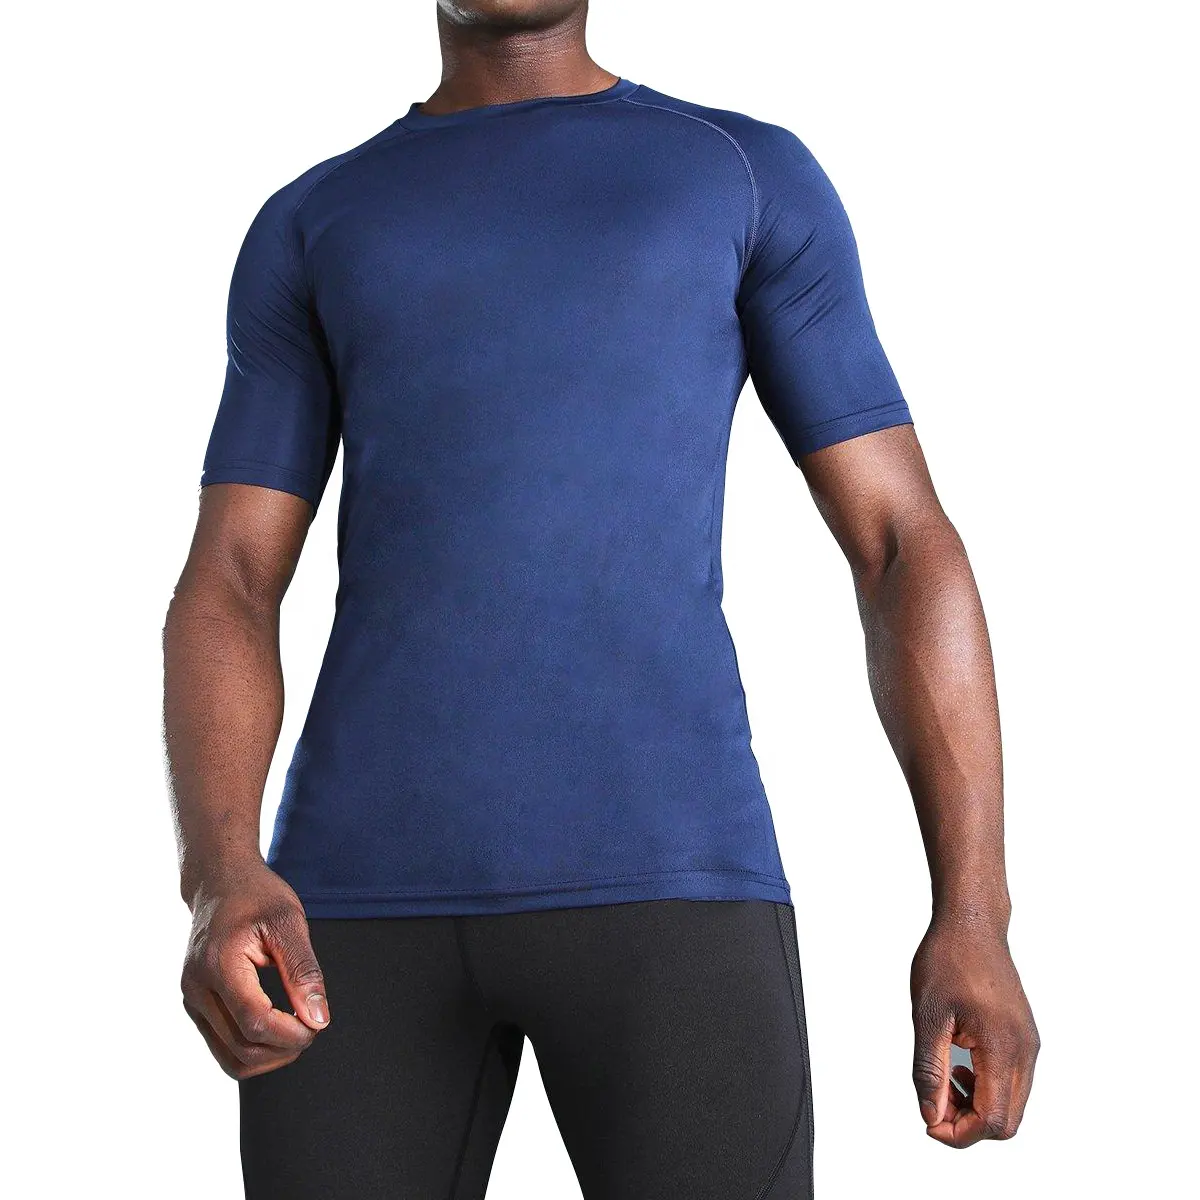 Men's Fitness Clothing Slim Body Fitted Stretched High quality custom Printed Round Neck short sleeves Gym T shirts